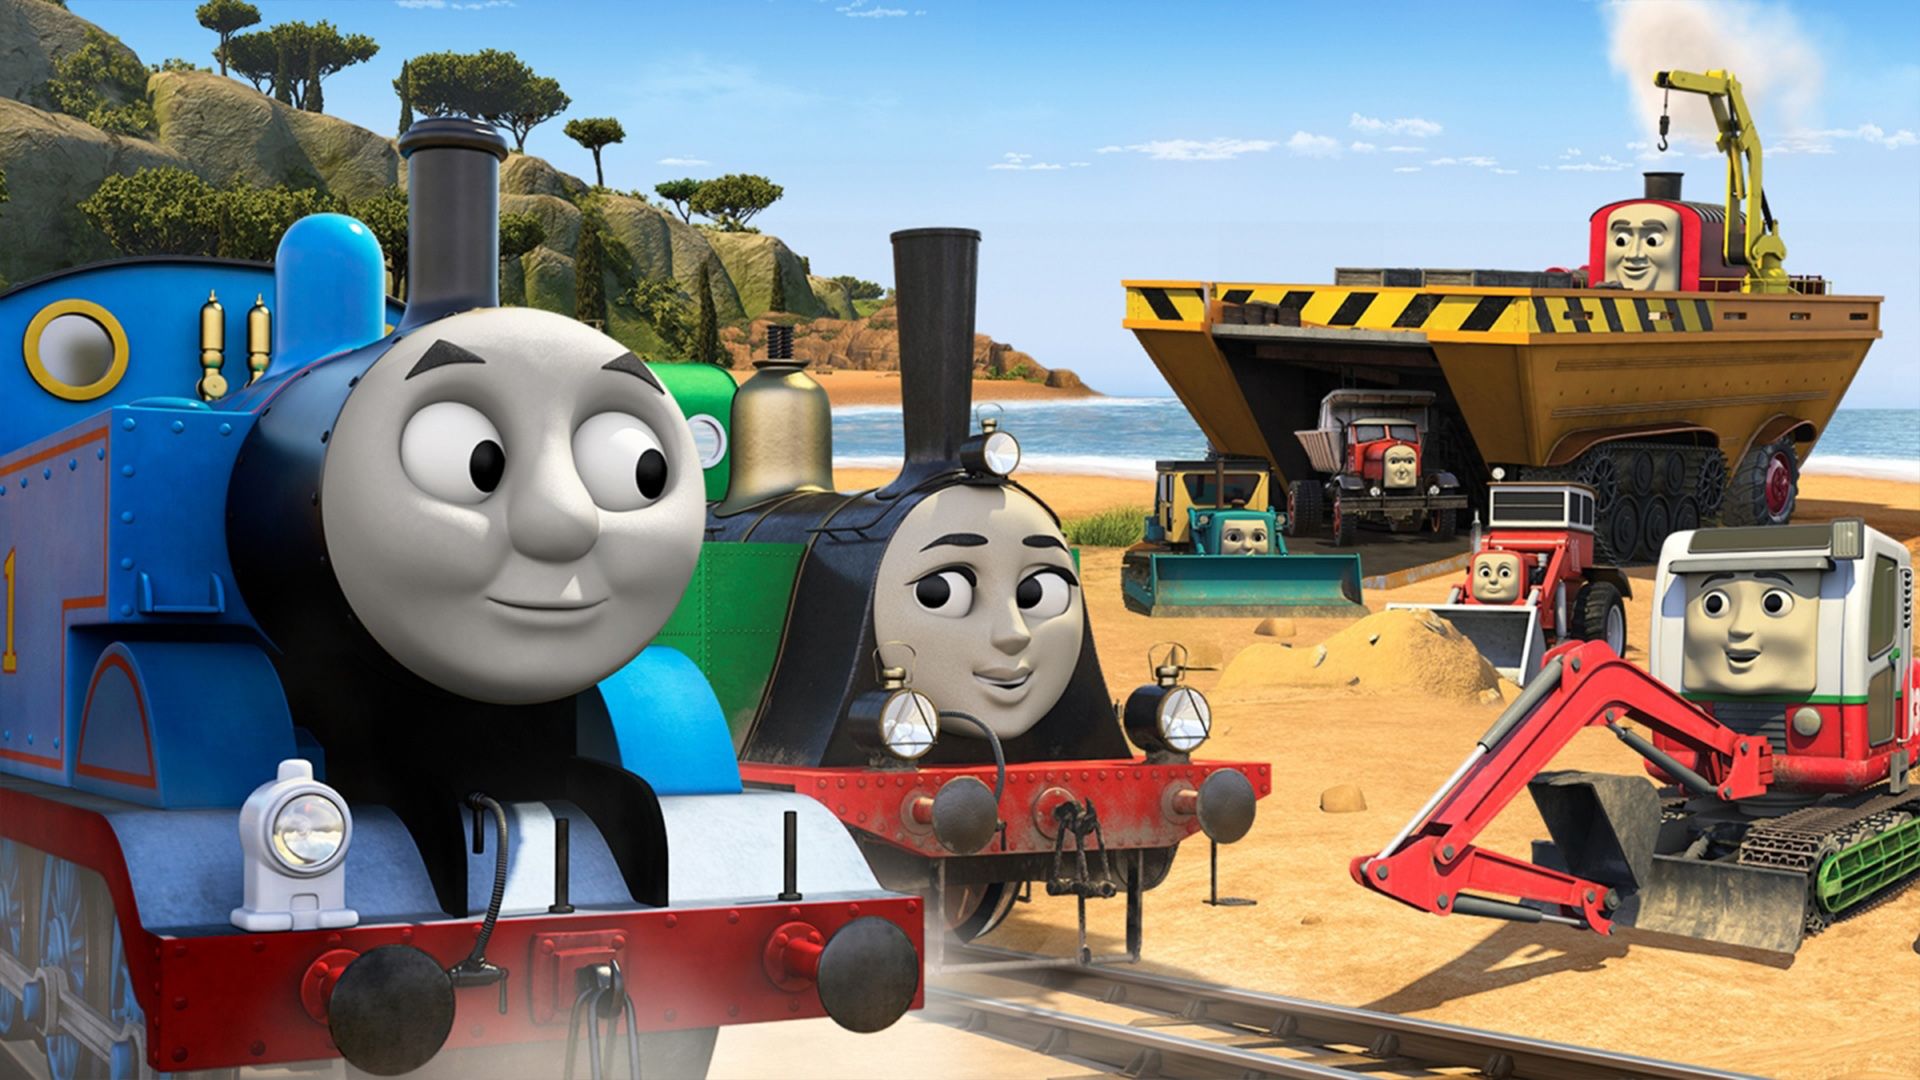 Thomas & Friends: Digs & Discoveries background